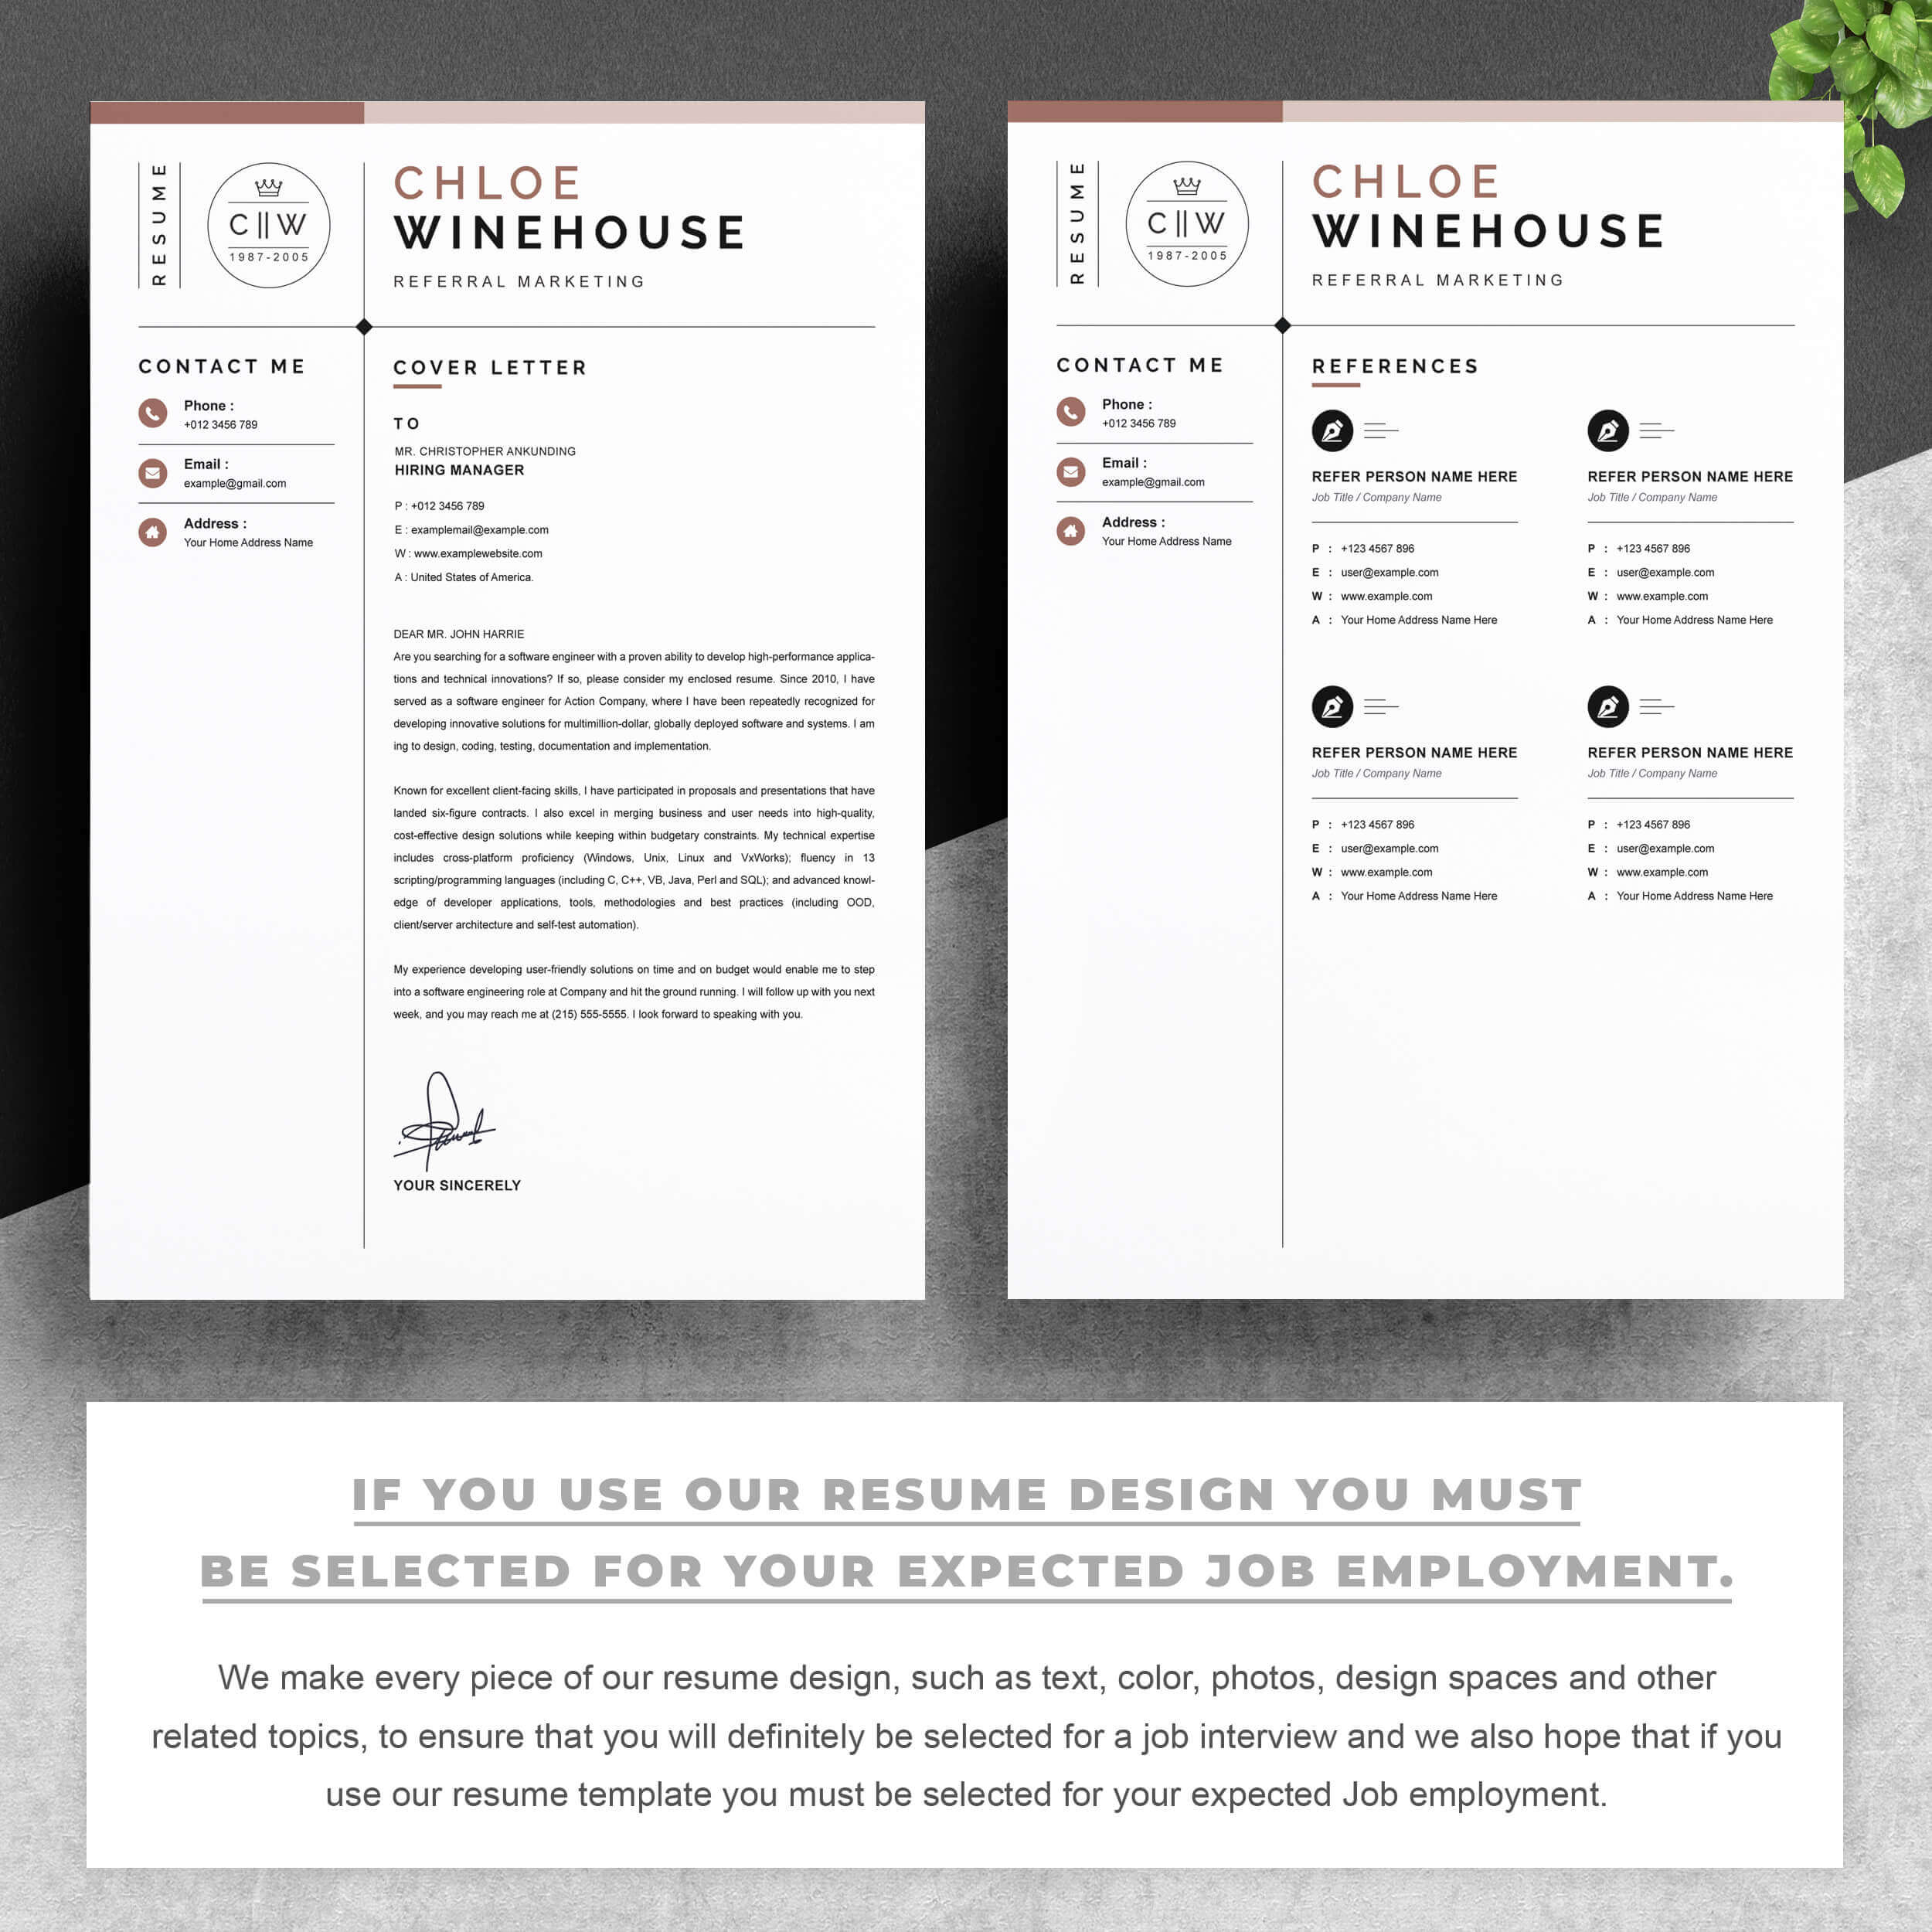 03 2 pages free resume design template copy 1 655